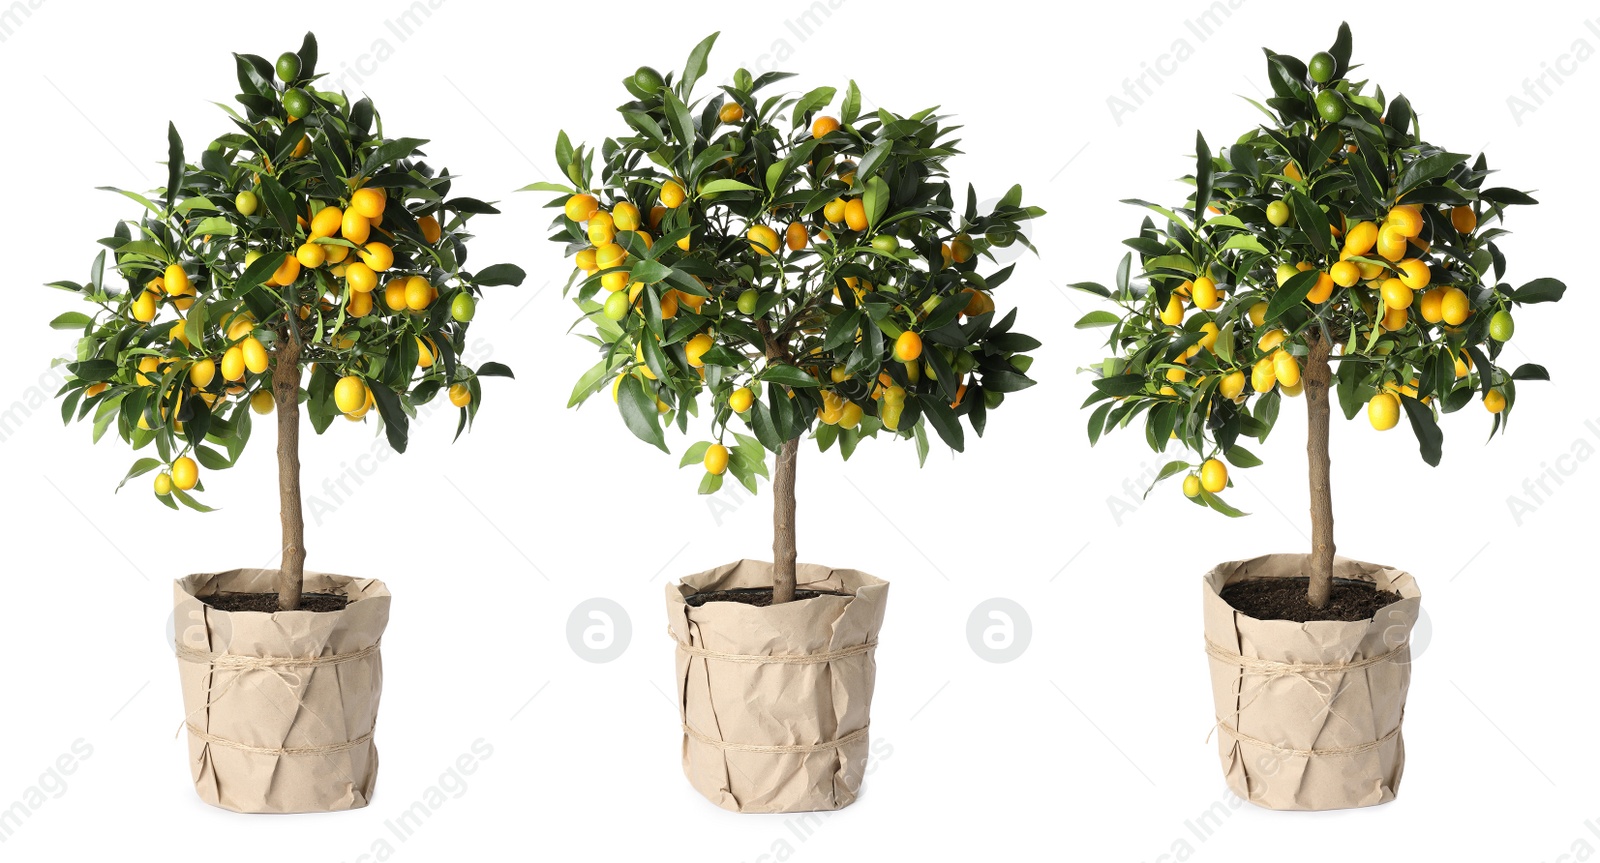 Image of Set of kumquat trees with fruits in flowerpots on white background. Banner design